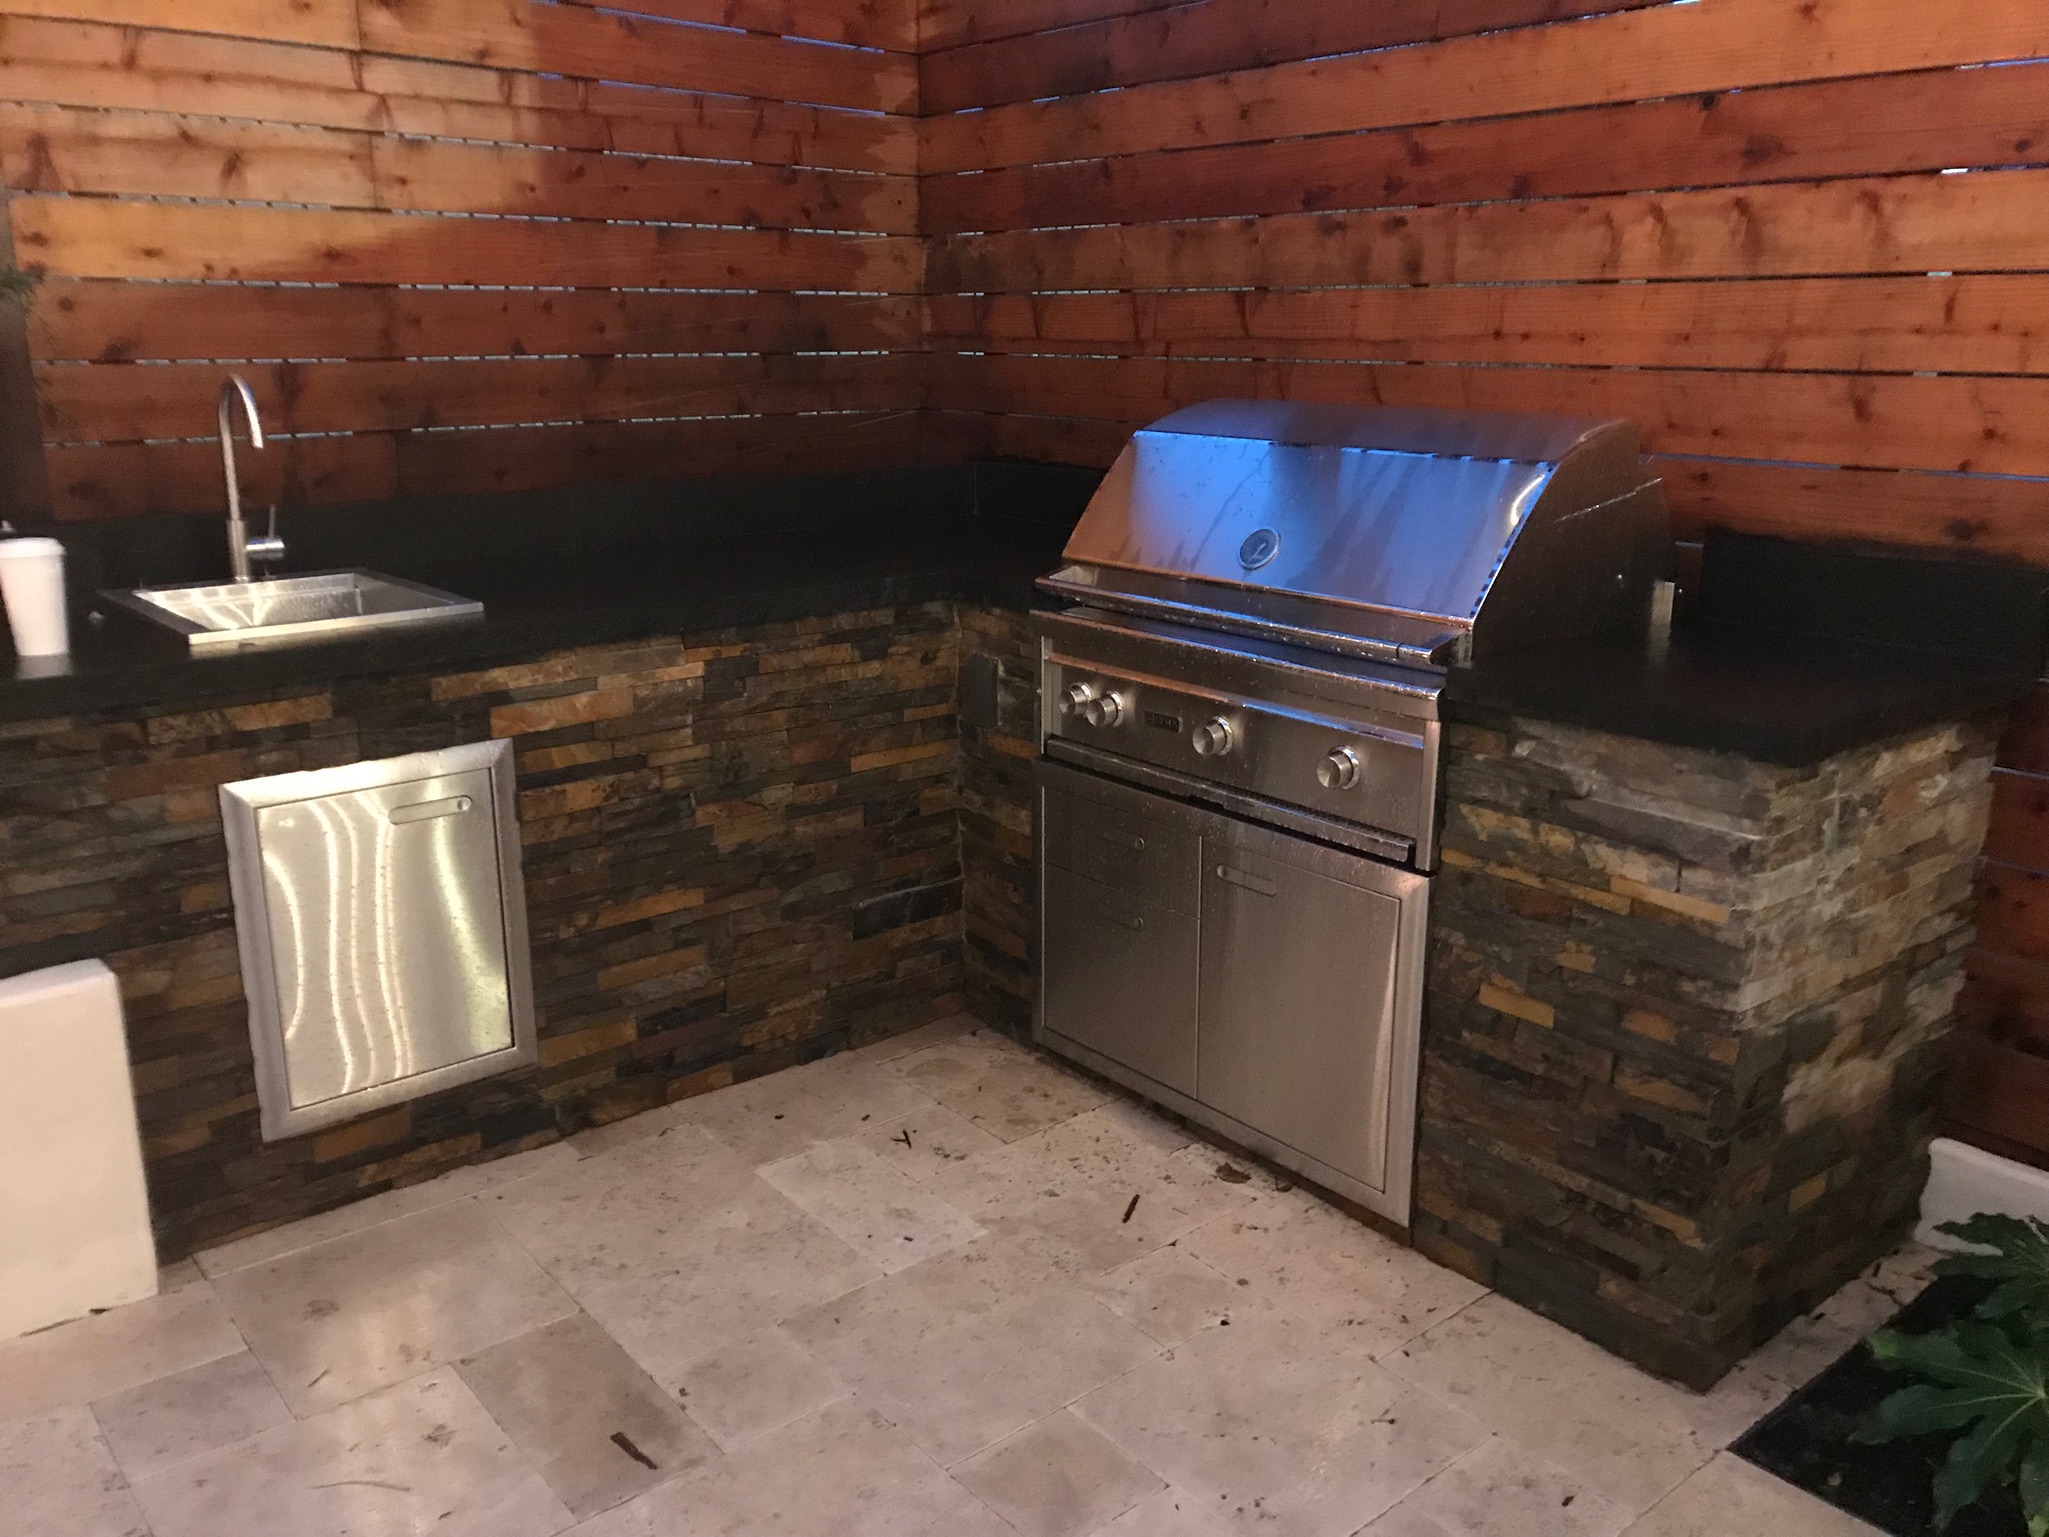 Custom built in BBQ unit on right with sink on left and stone counter in L-shape. Redwood fence in background and travertine pavers on ground.